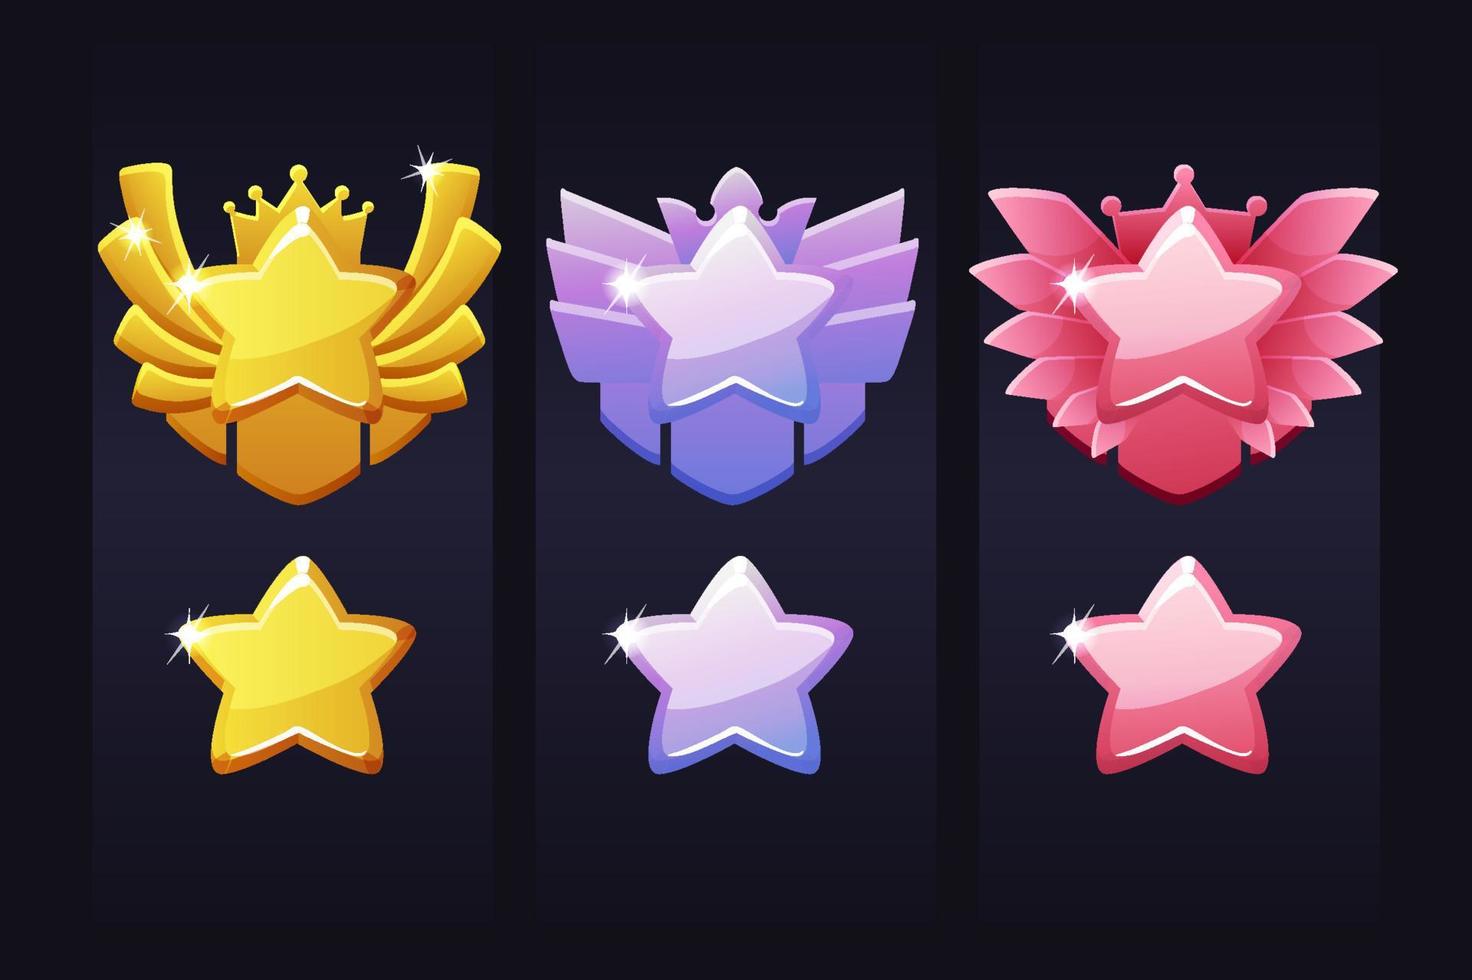 Achievement stars for the game, award labels for winner. Vector illustration set of colorful stars icons for graphic design.